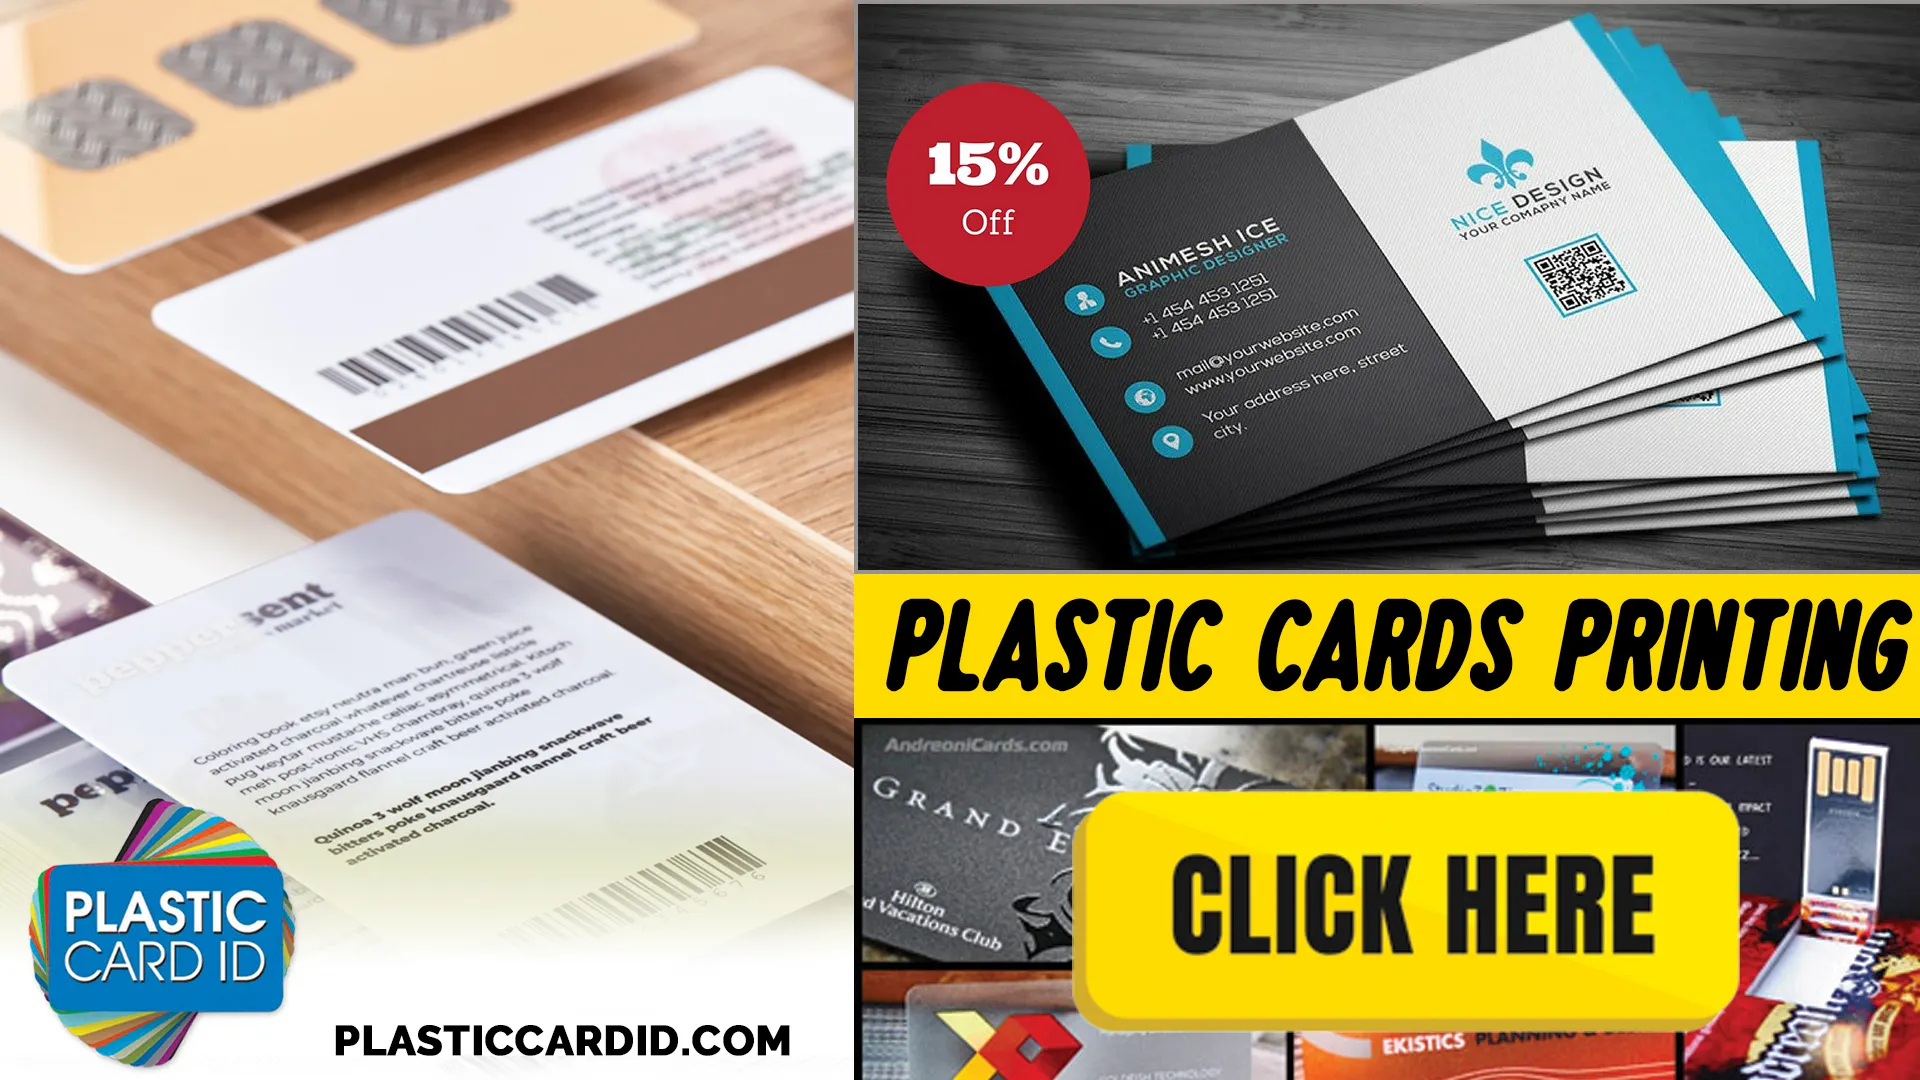 Why Choose Plastic Card ID
 for Your Plastic Card Printing Needs